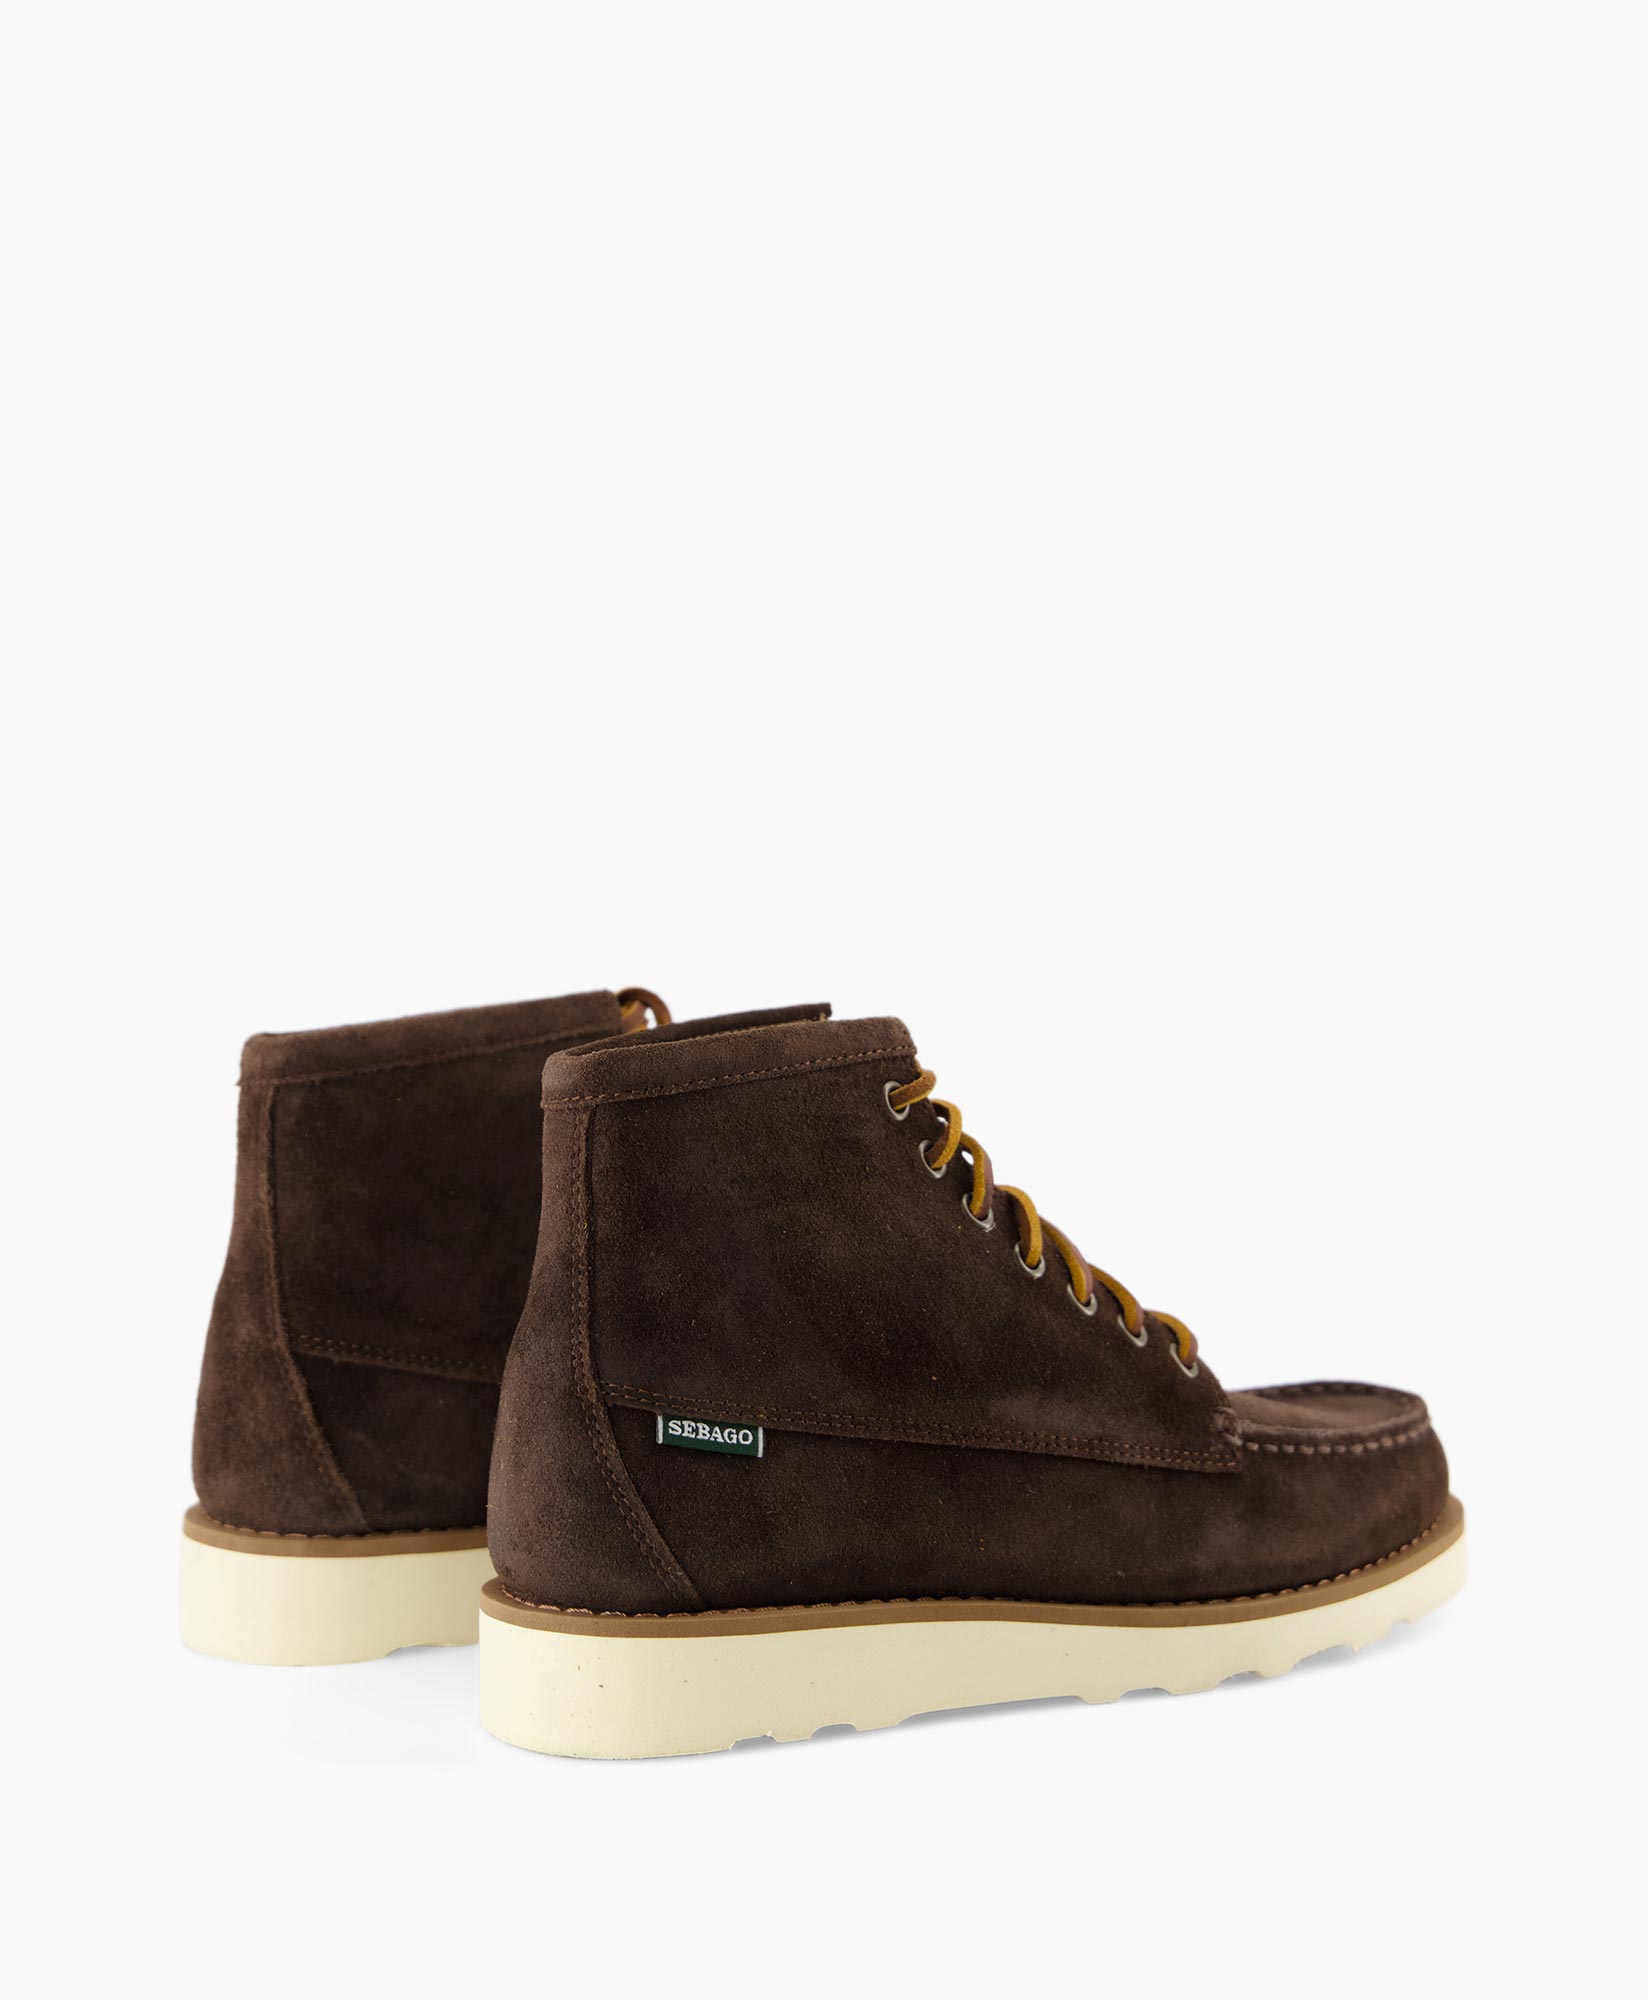 Veterboot Tala High Oiled Suede Donker Bruin